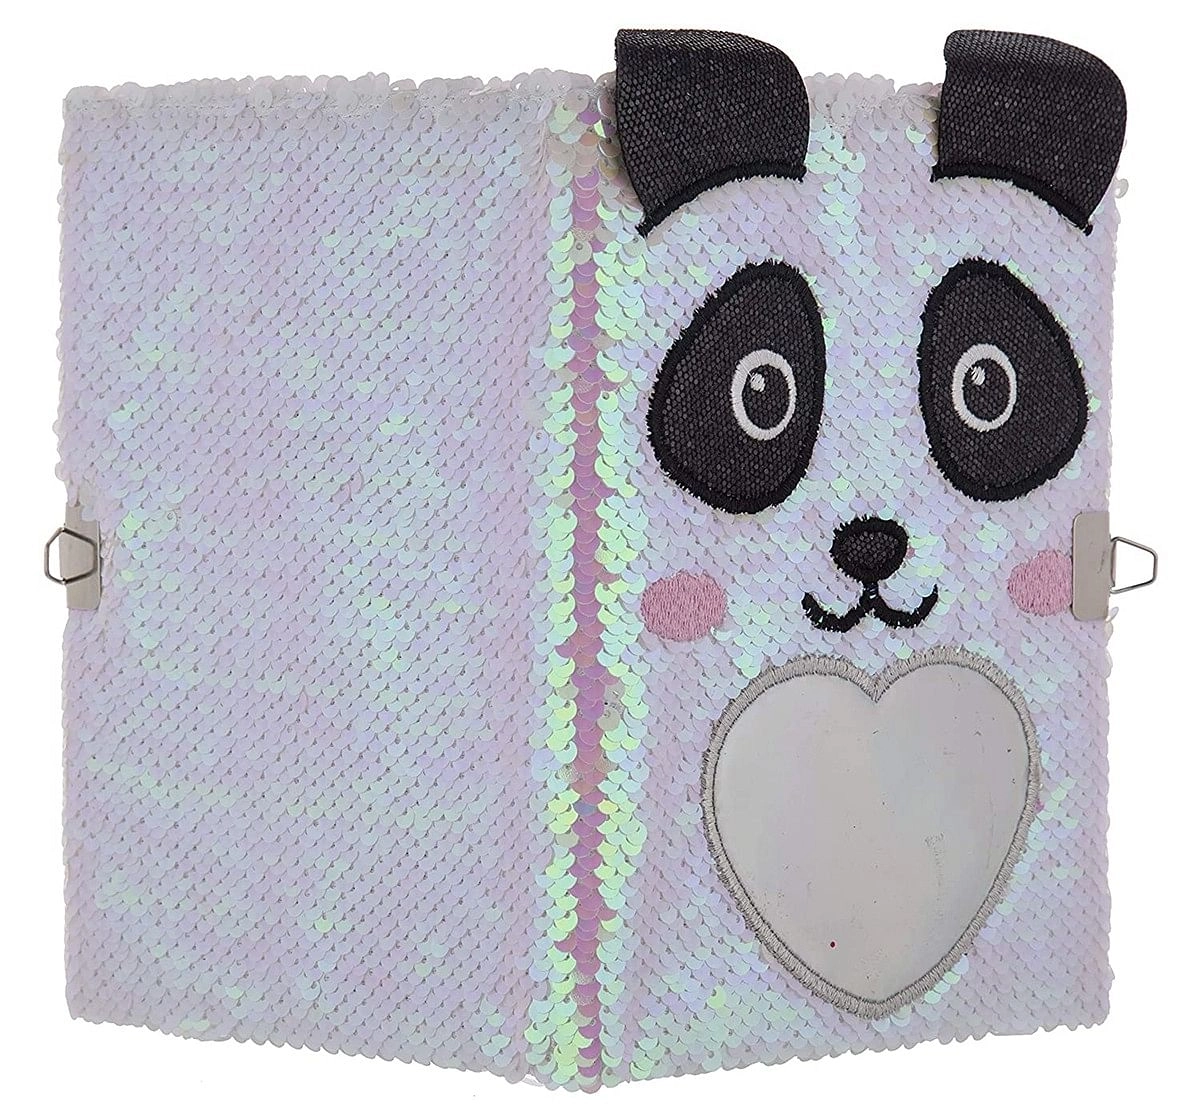 Mirada Panda Flip Sequin Notebook/Diary Study & Desk Accessories for age 3Y+ (White)